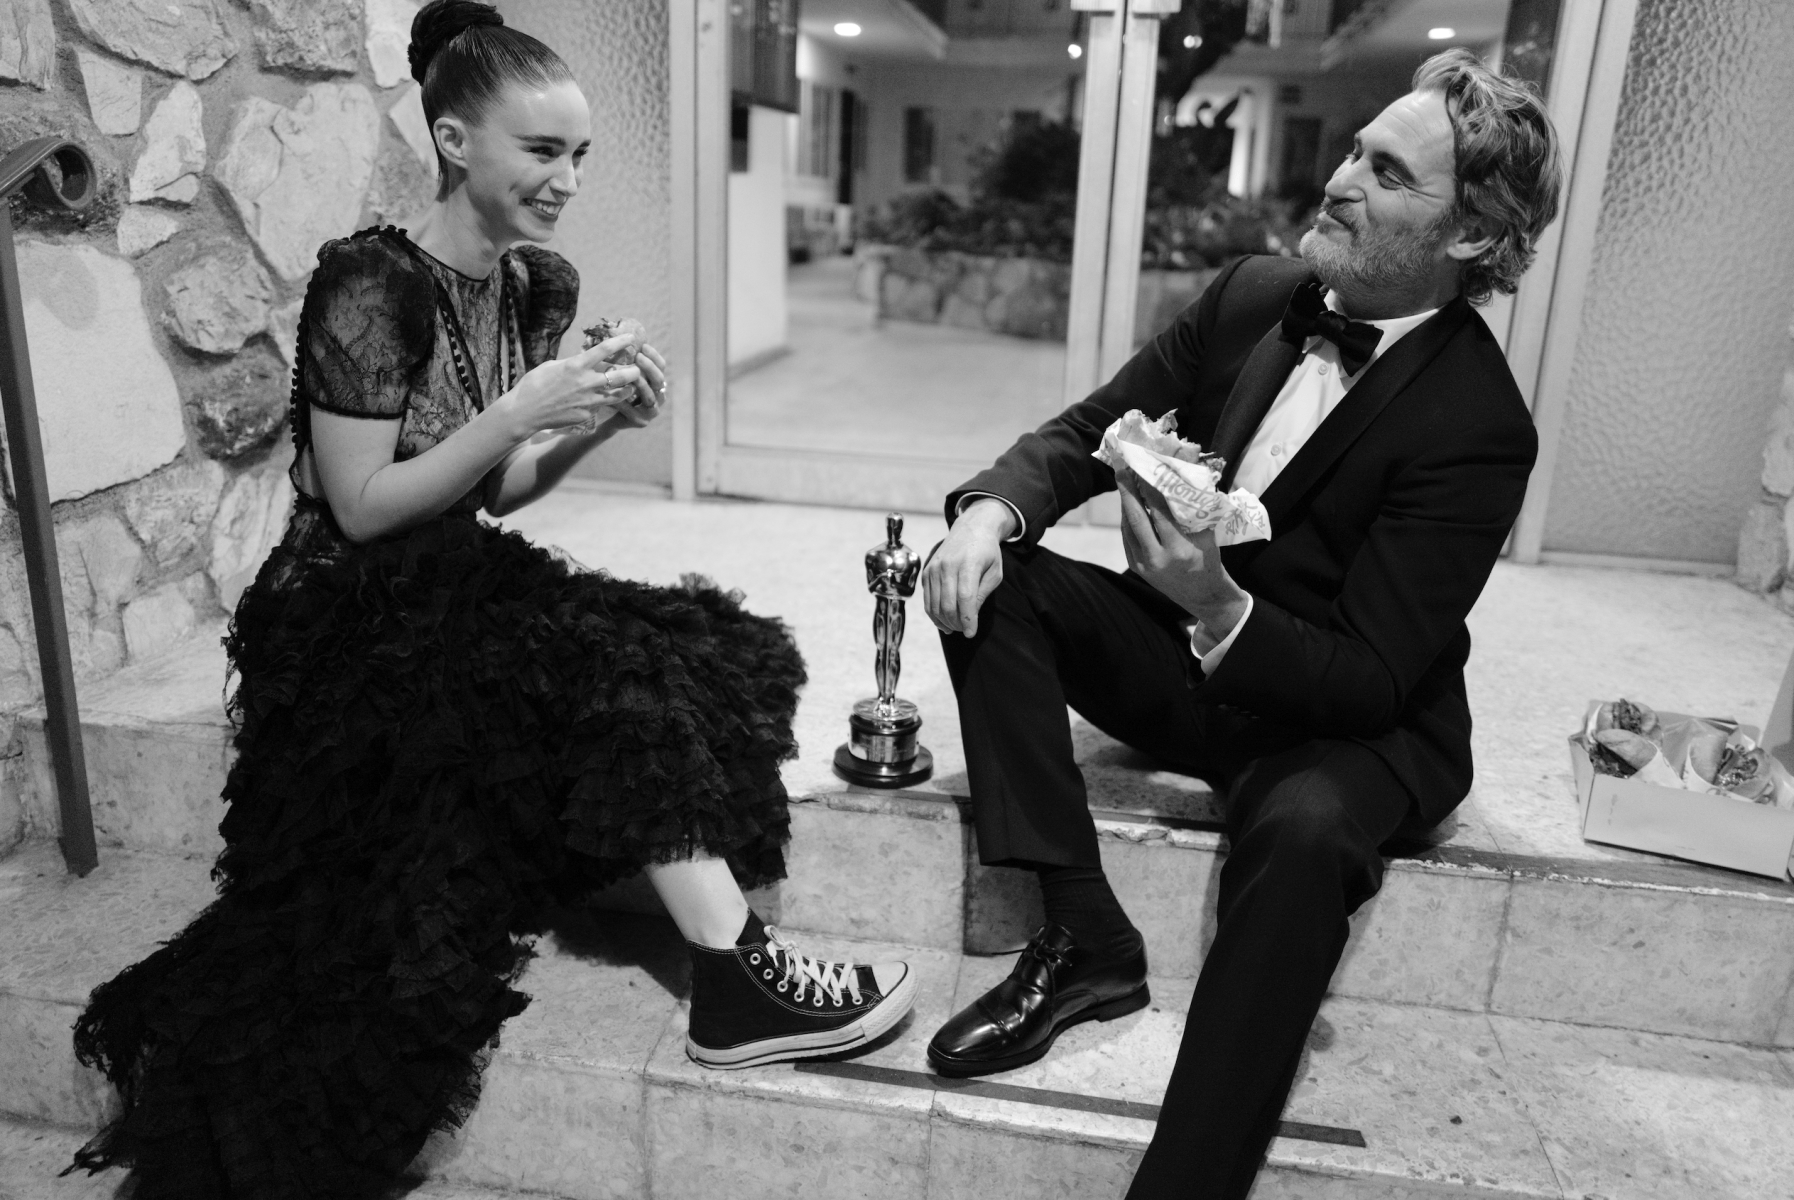 "This picture of Joaquin Phoenix and Rooney Mara was taken on Oscar night, just after Joaquin had won Best Actor for <em>Joker</em>. The story in this picture, for me, is a love story. You have two people that clearly adore each other and who, despite their great fame, are really quite down-to-earth and at their happiest in each other’s company. There’s an authentic cuteness to Rooney’s Converse trainers. She’s taken off her high heels and she’s got her ball gown on still, but she’s wearing Converse. And there they are just chomping down on these vegan burgers. The idea behind this image was that Joaquin and Rooney wanted to use Joaquin’s Oscar win and the attention that it brought to highlight veganism, a cause very close to both of their<br>hearts."<br>